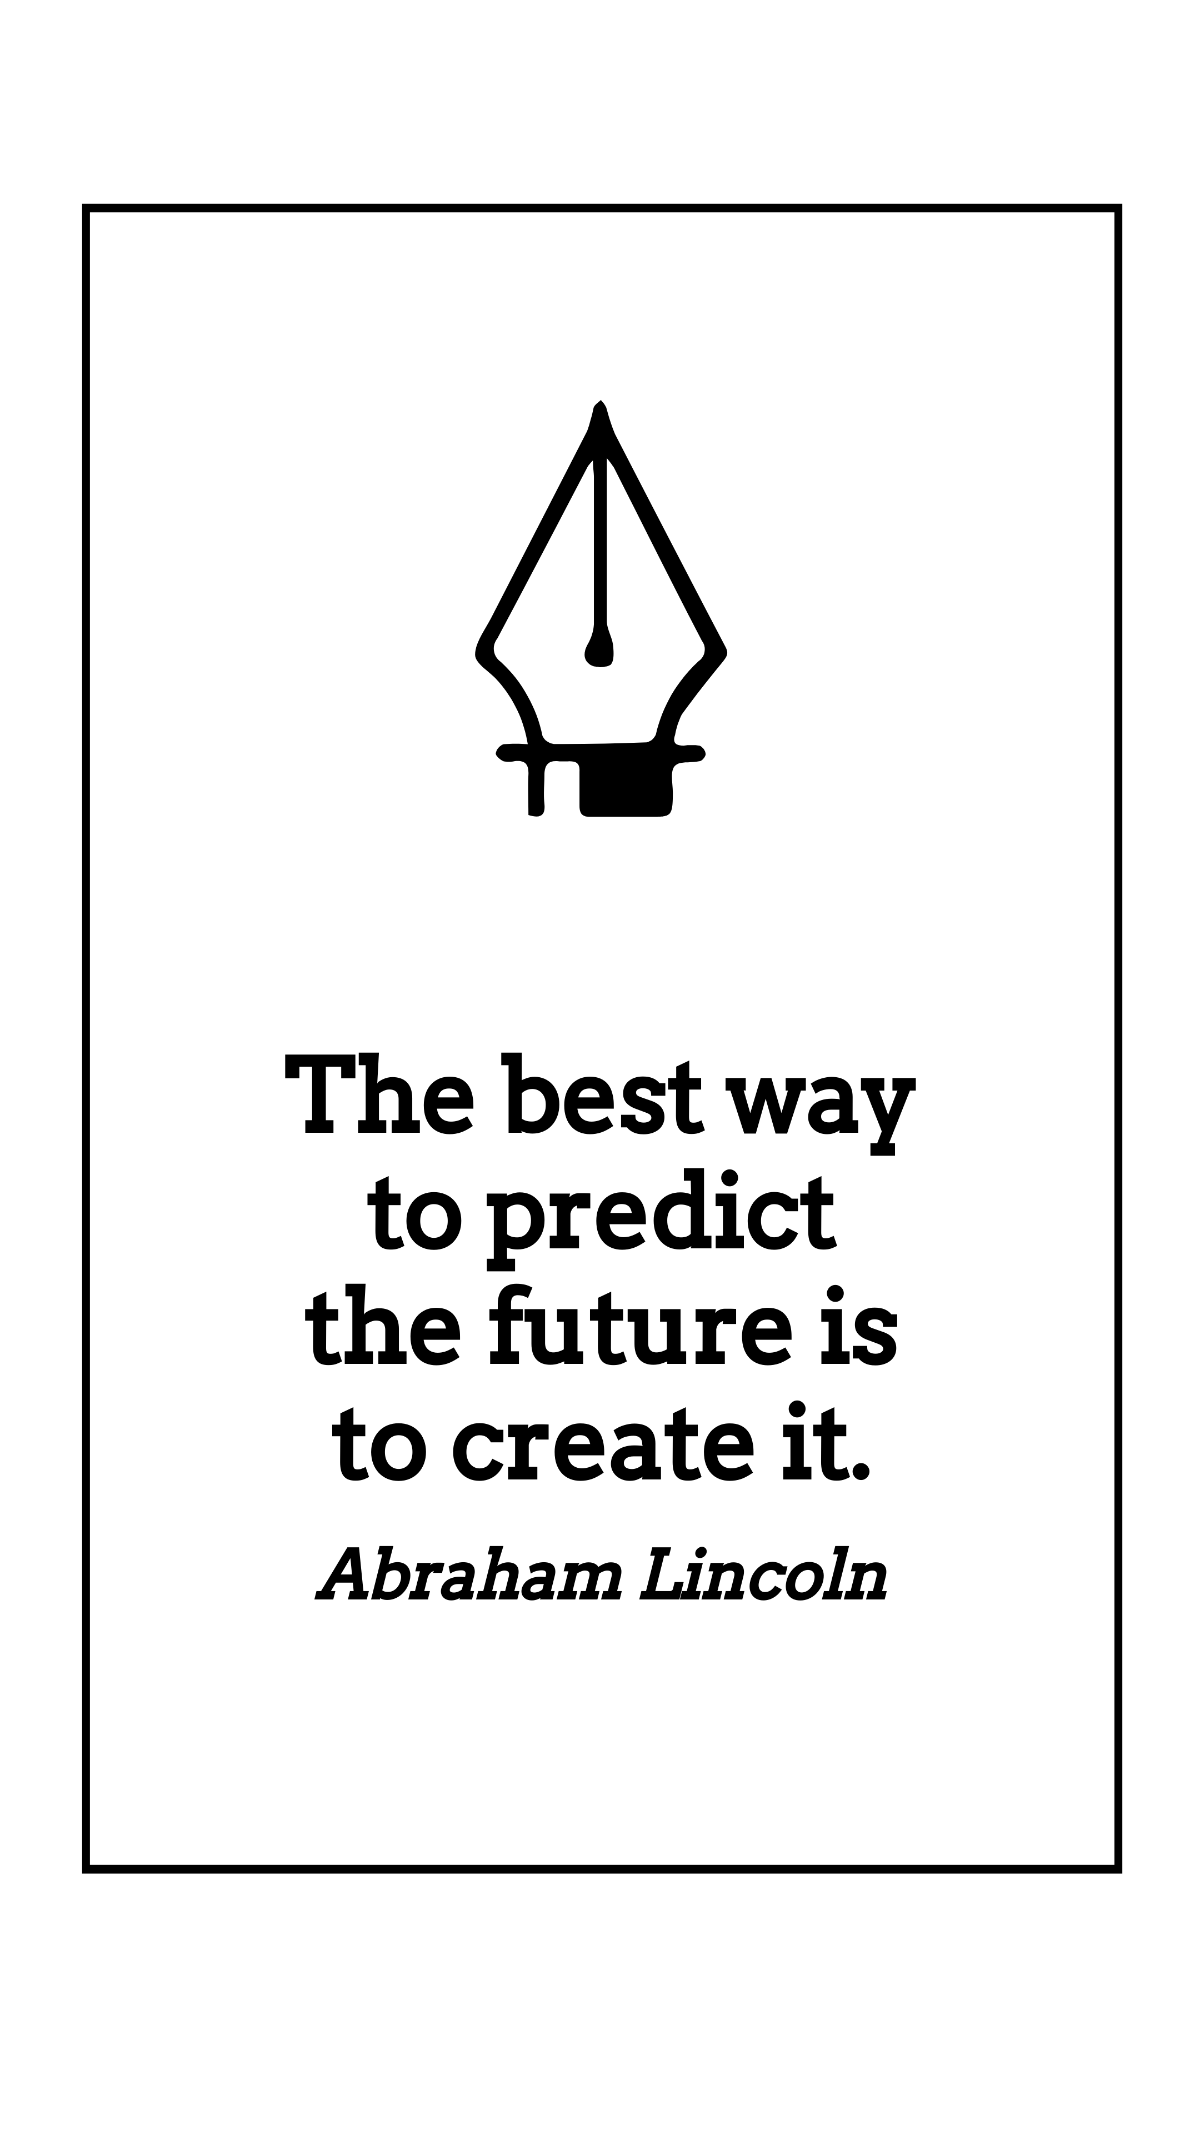 Abraham Lincoln - The best way to predict the future is to create it. Template